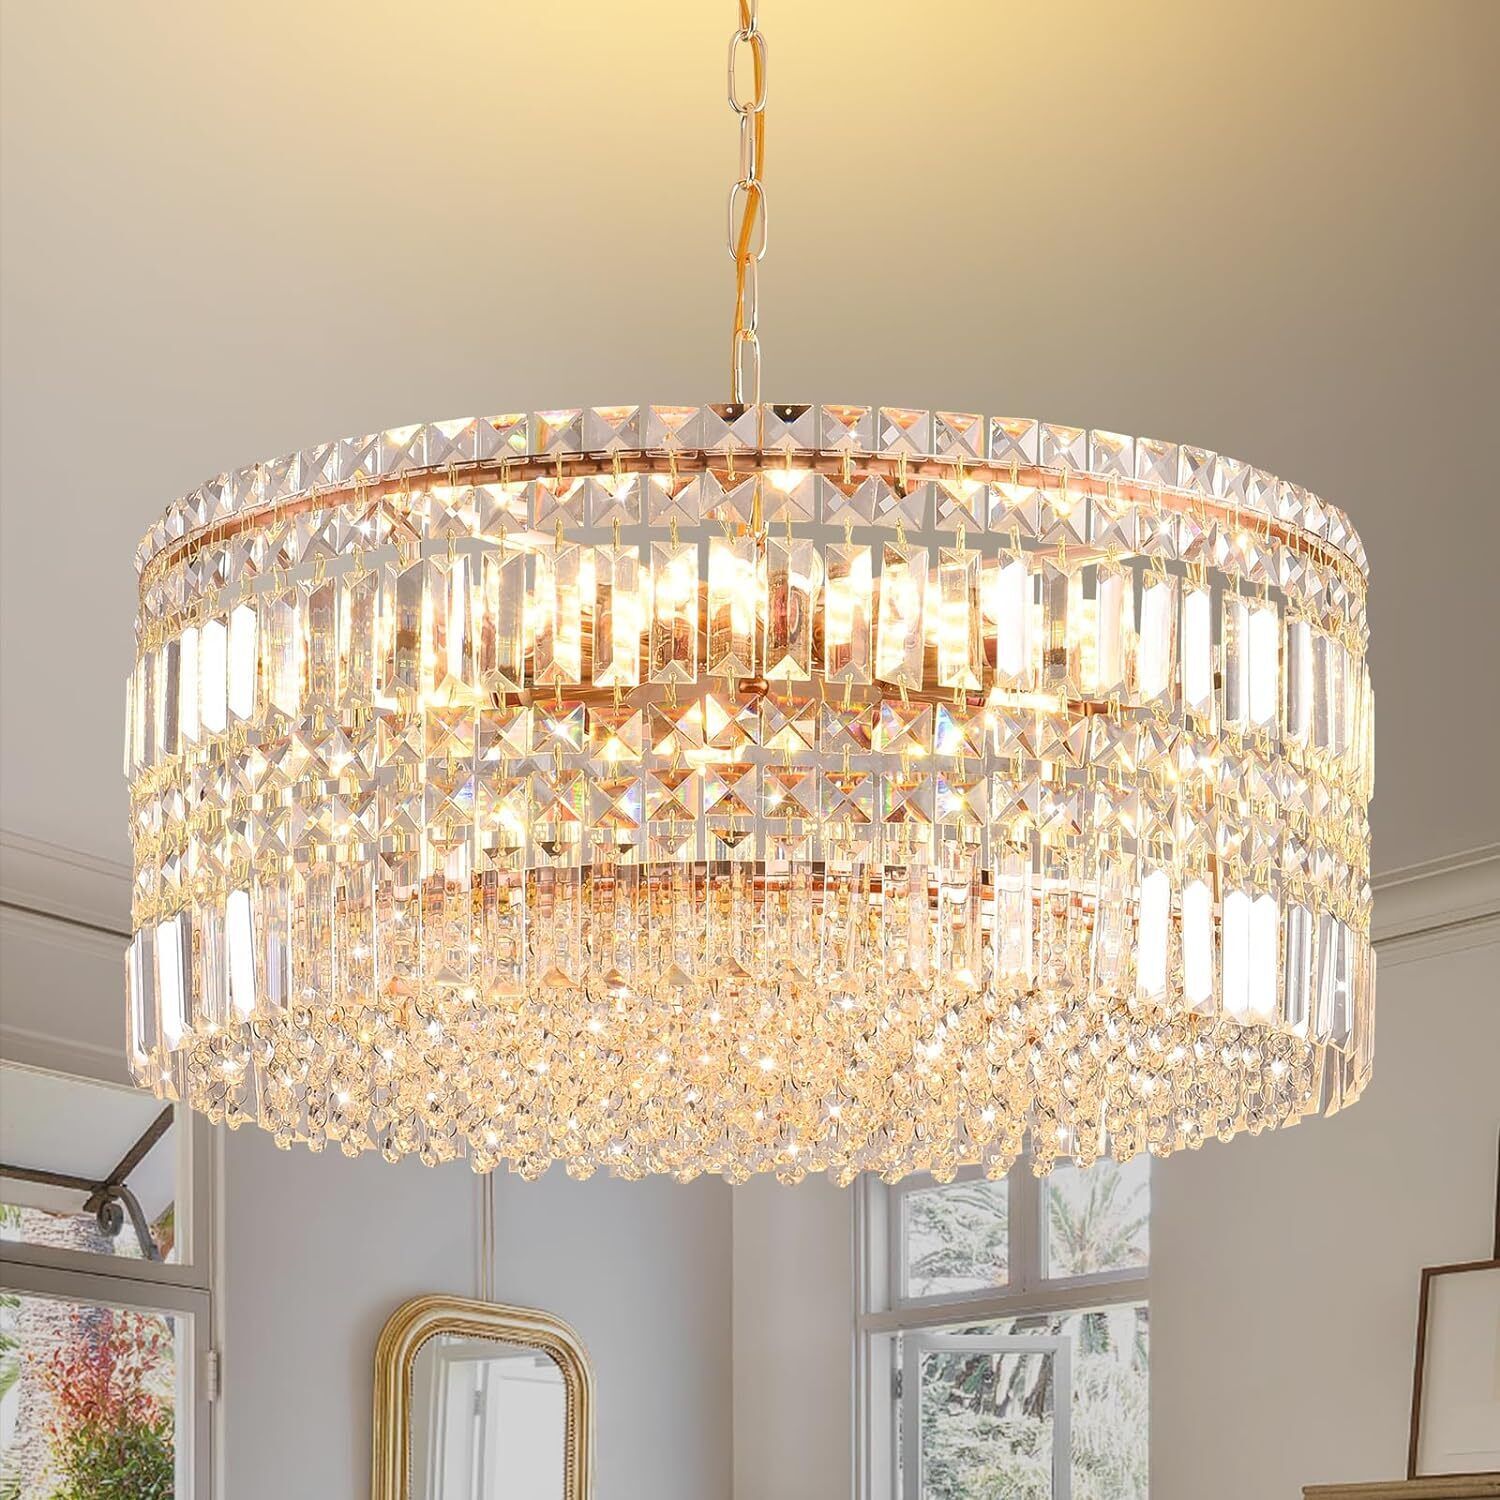 Contemporary Gold Crystal Ceiling Light - Ideal for Various Rooms - 23.6''